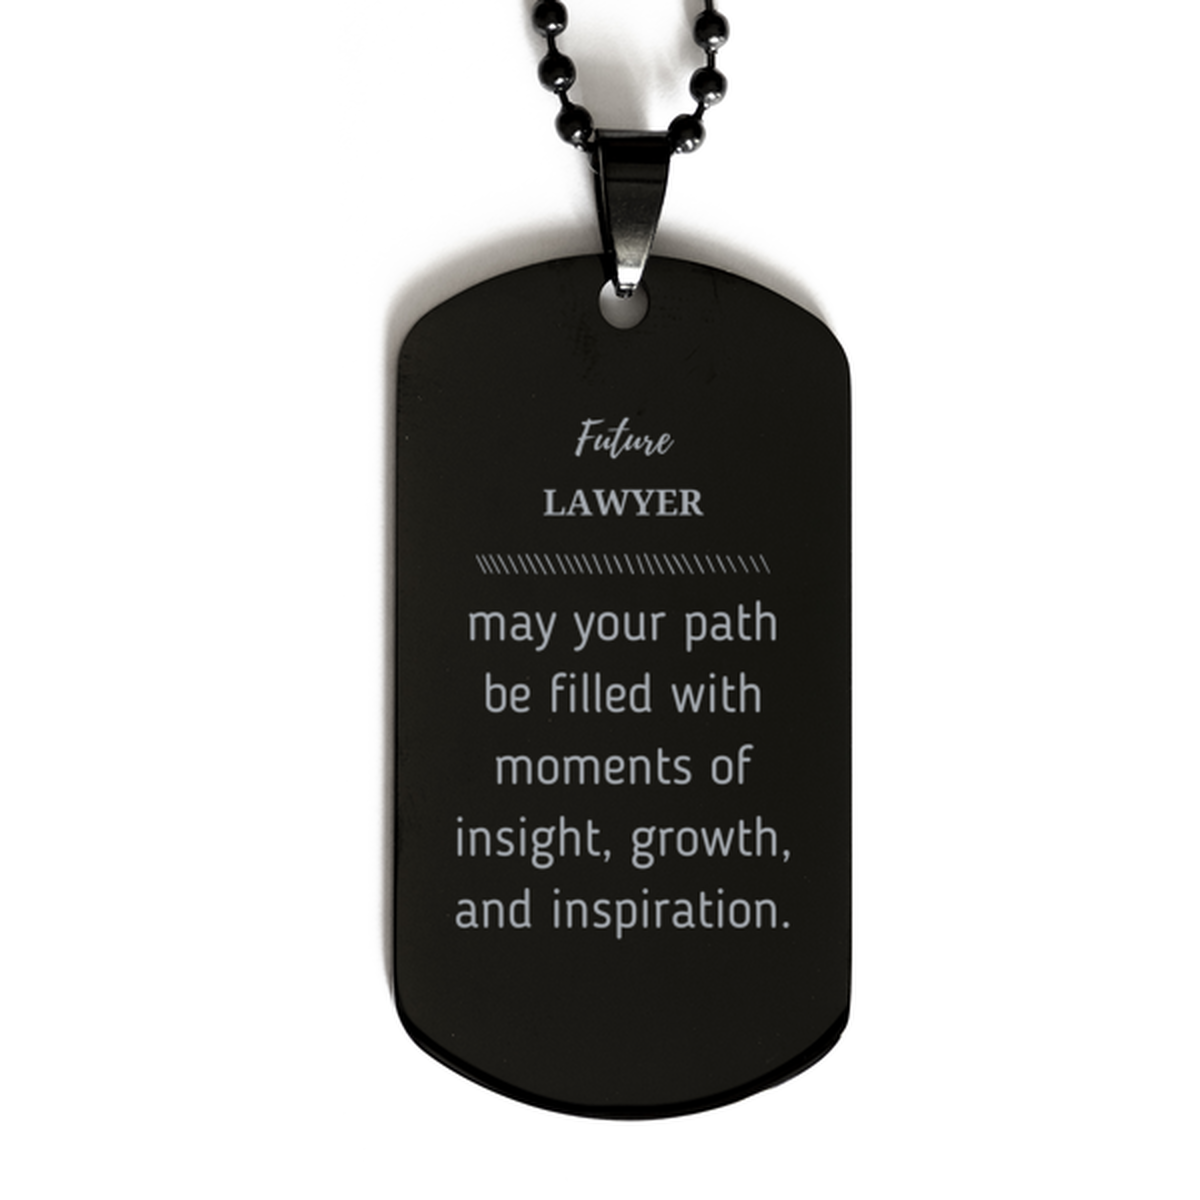 Future Lawyer Gifts, May your path be filled with moments of insight, Graduation Gifts for New Lawyer, Christmas Unique Black Dog Tag For Men, Women, Friends